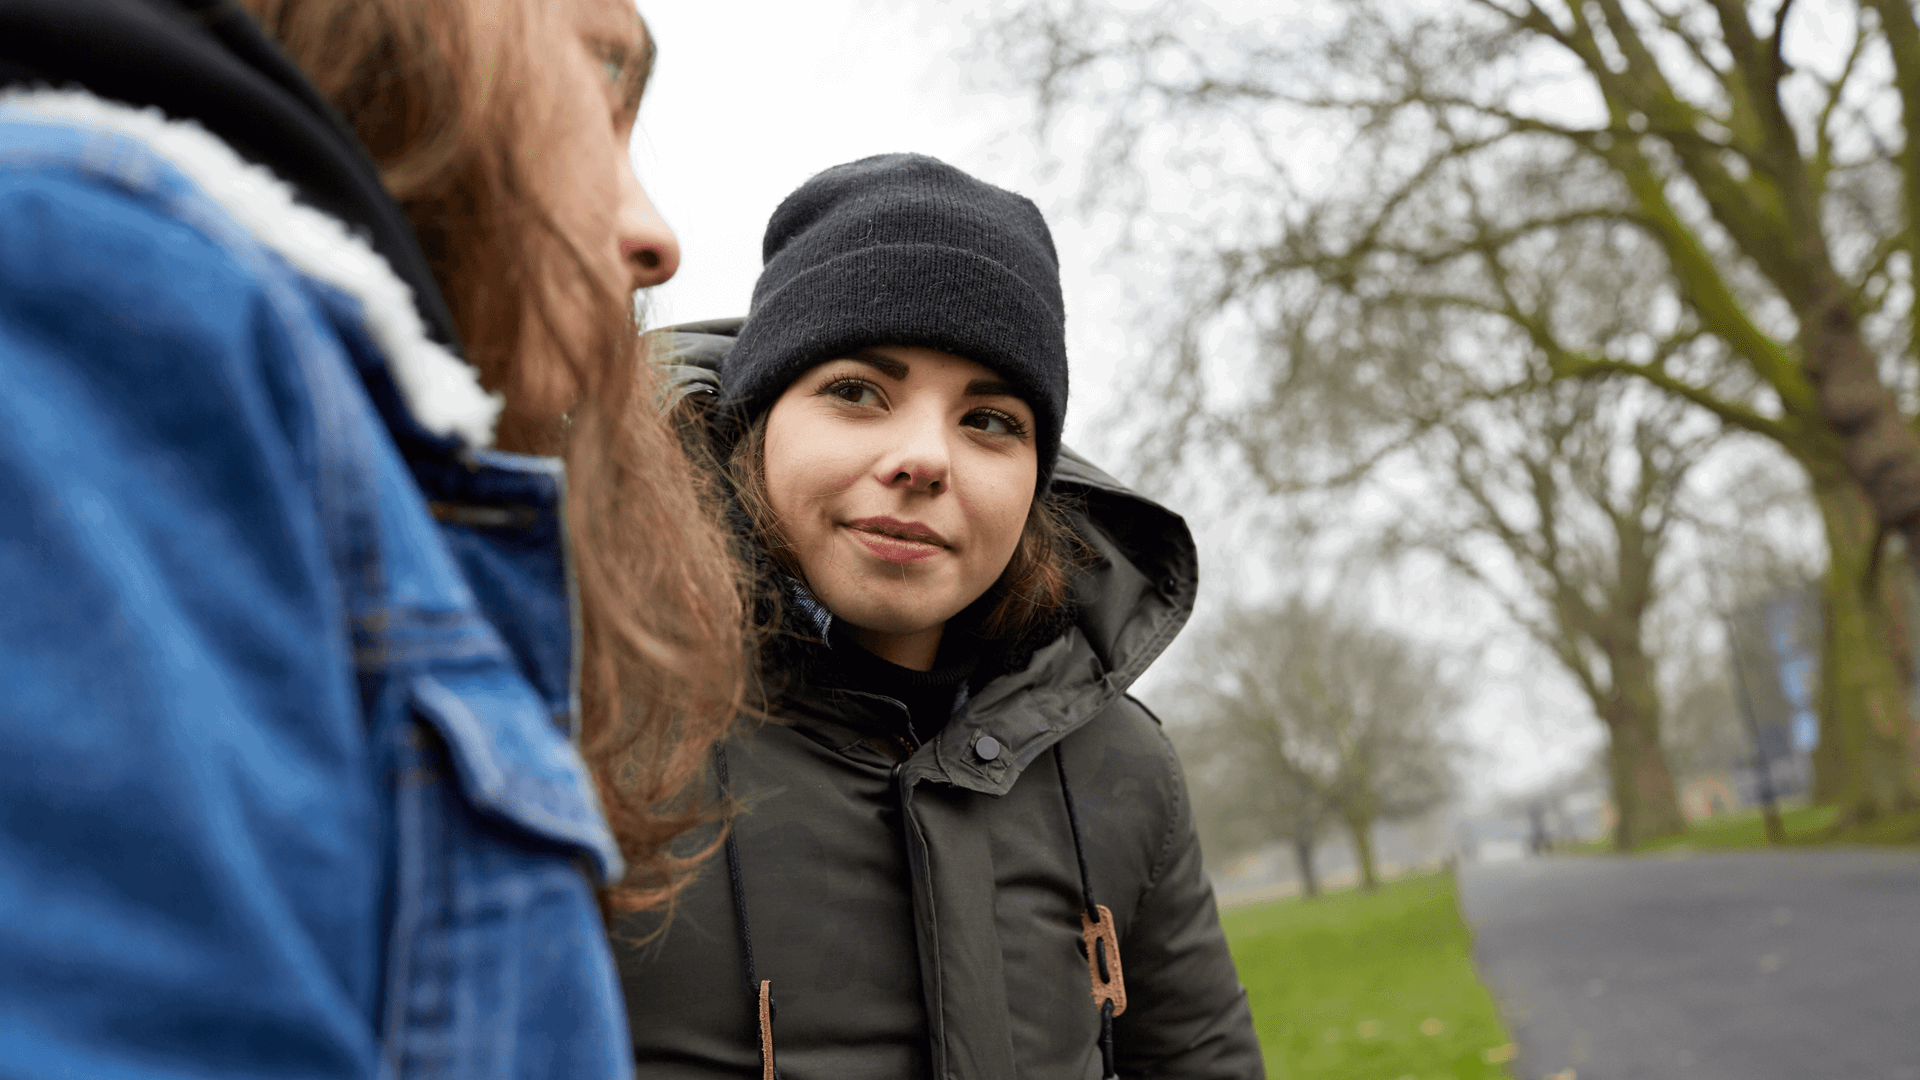 medium-shot-of-a-young-woman-in-black-jacket-and-black-beanie-glancing-on-another-girl-beside-her-while-on-the-park-and-with-trees-on-background